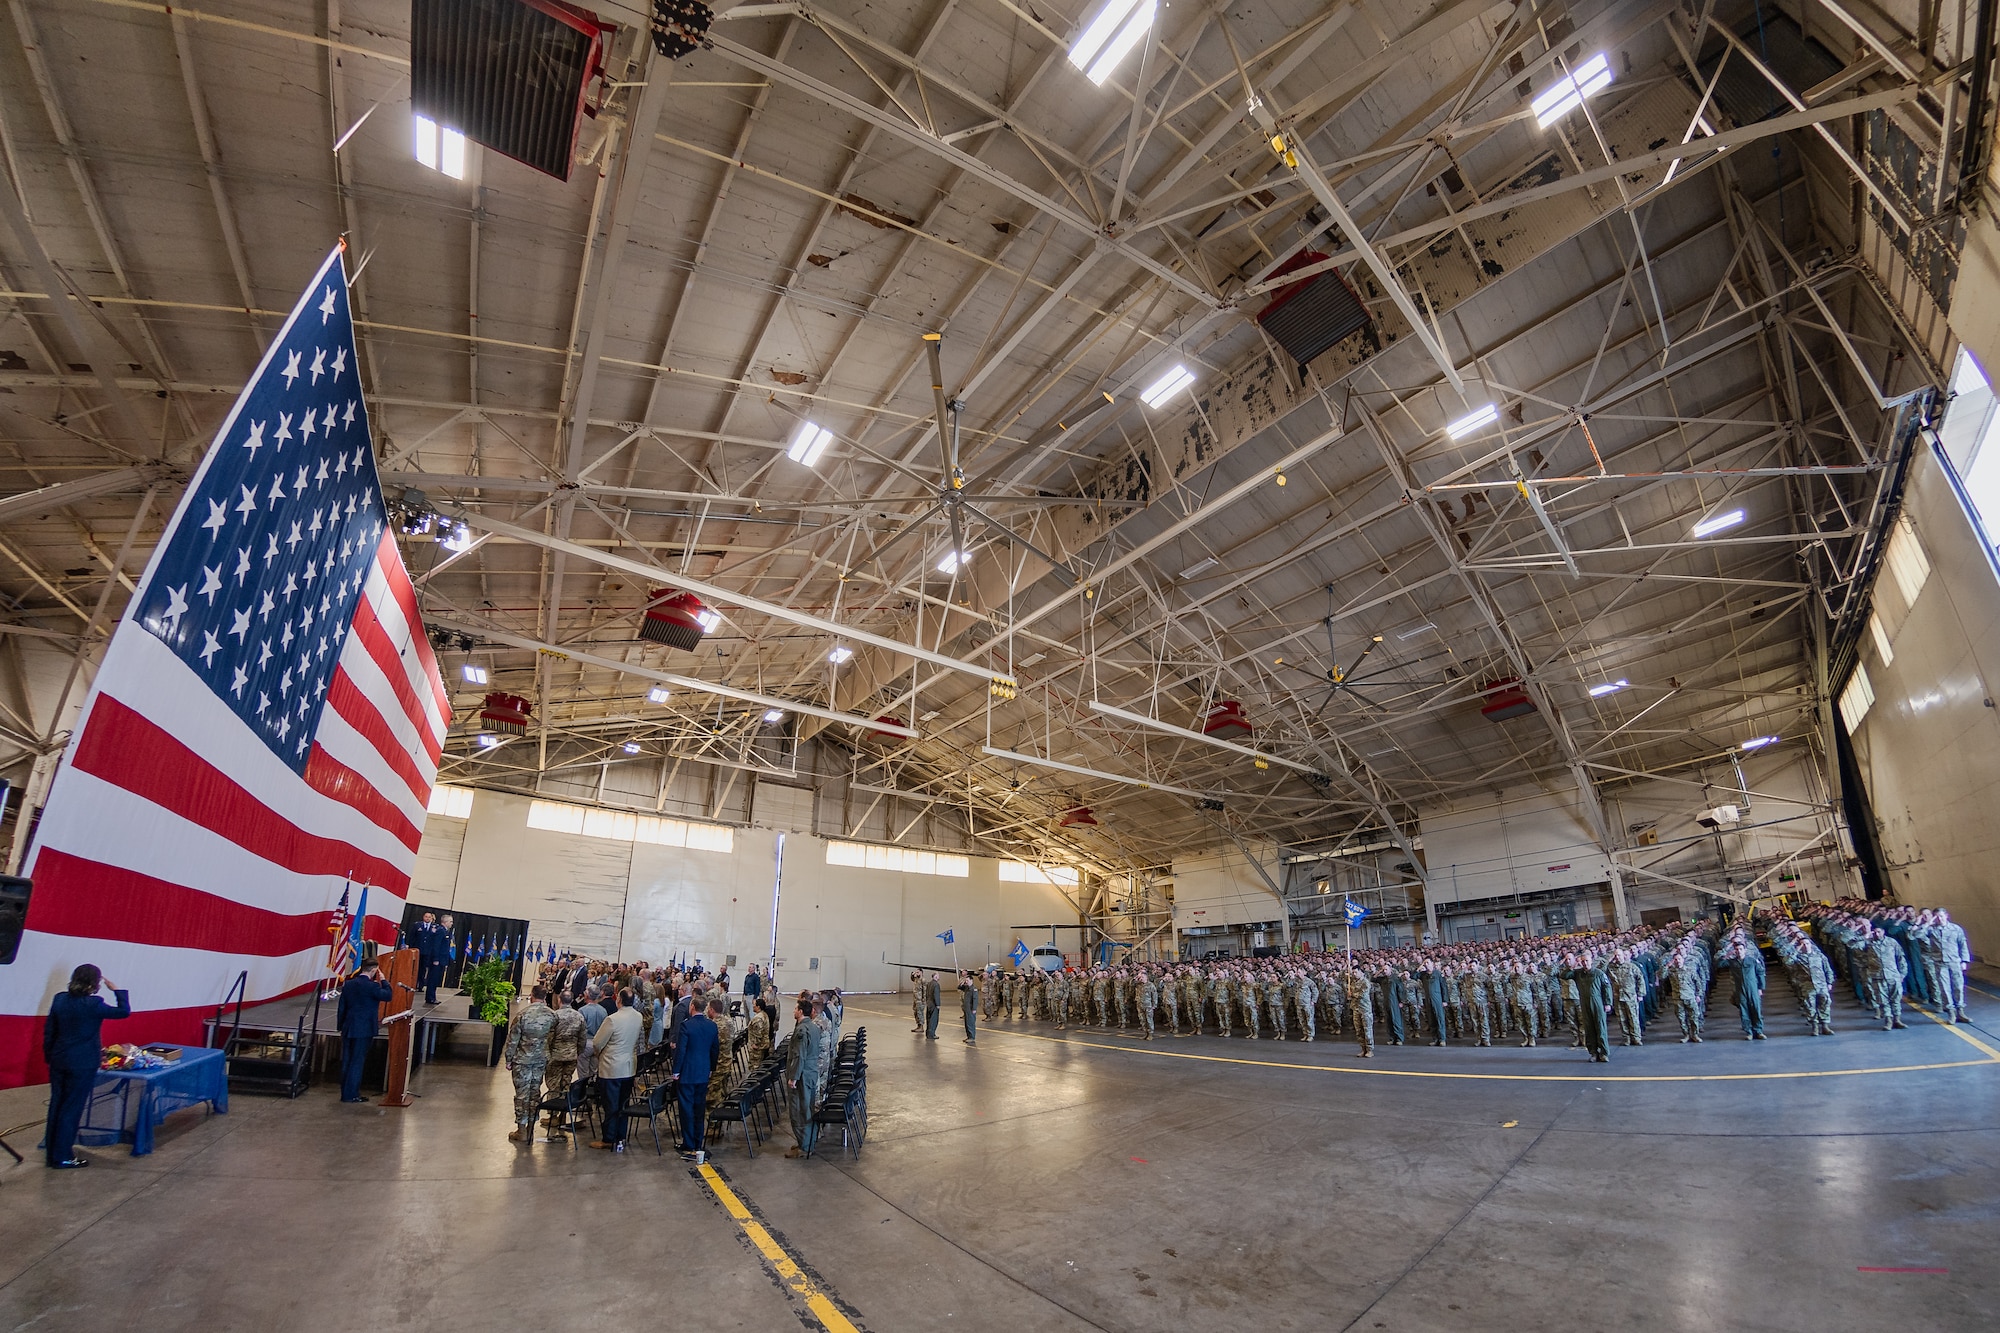 A crowd of Airmen gather in formation for a change of command ceremony in an aircraft hangar